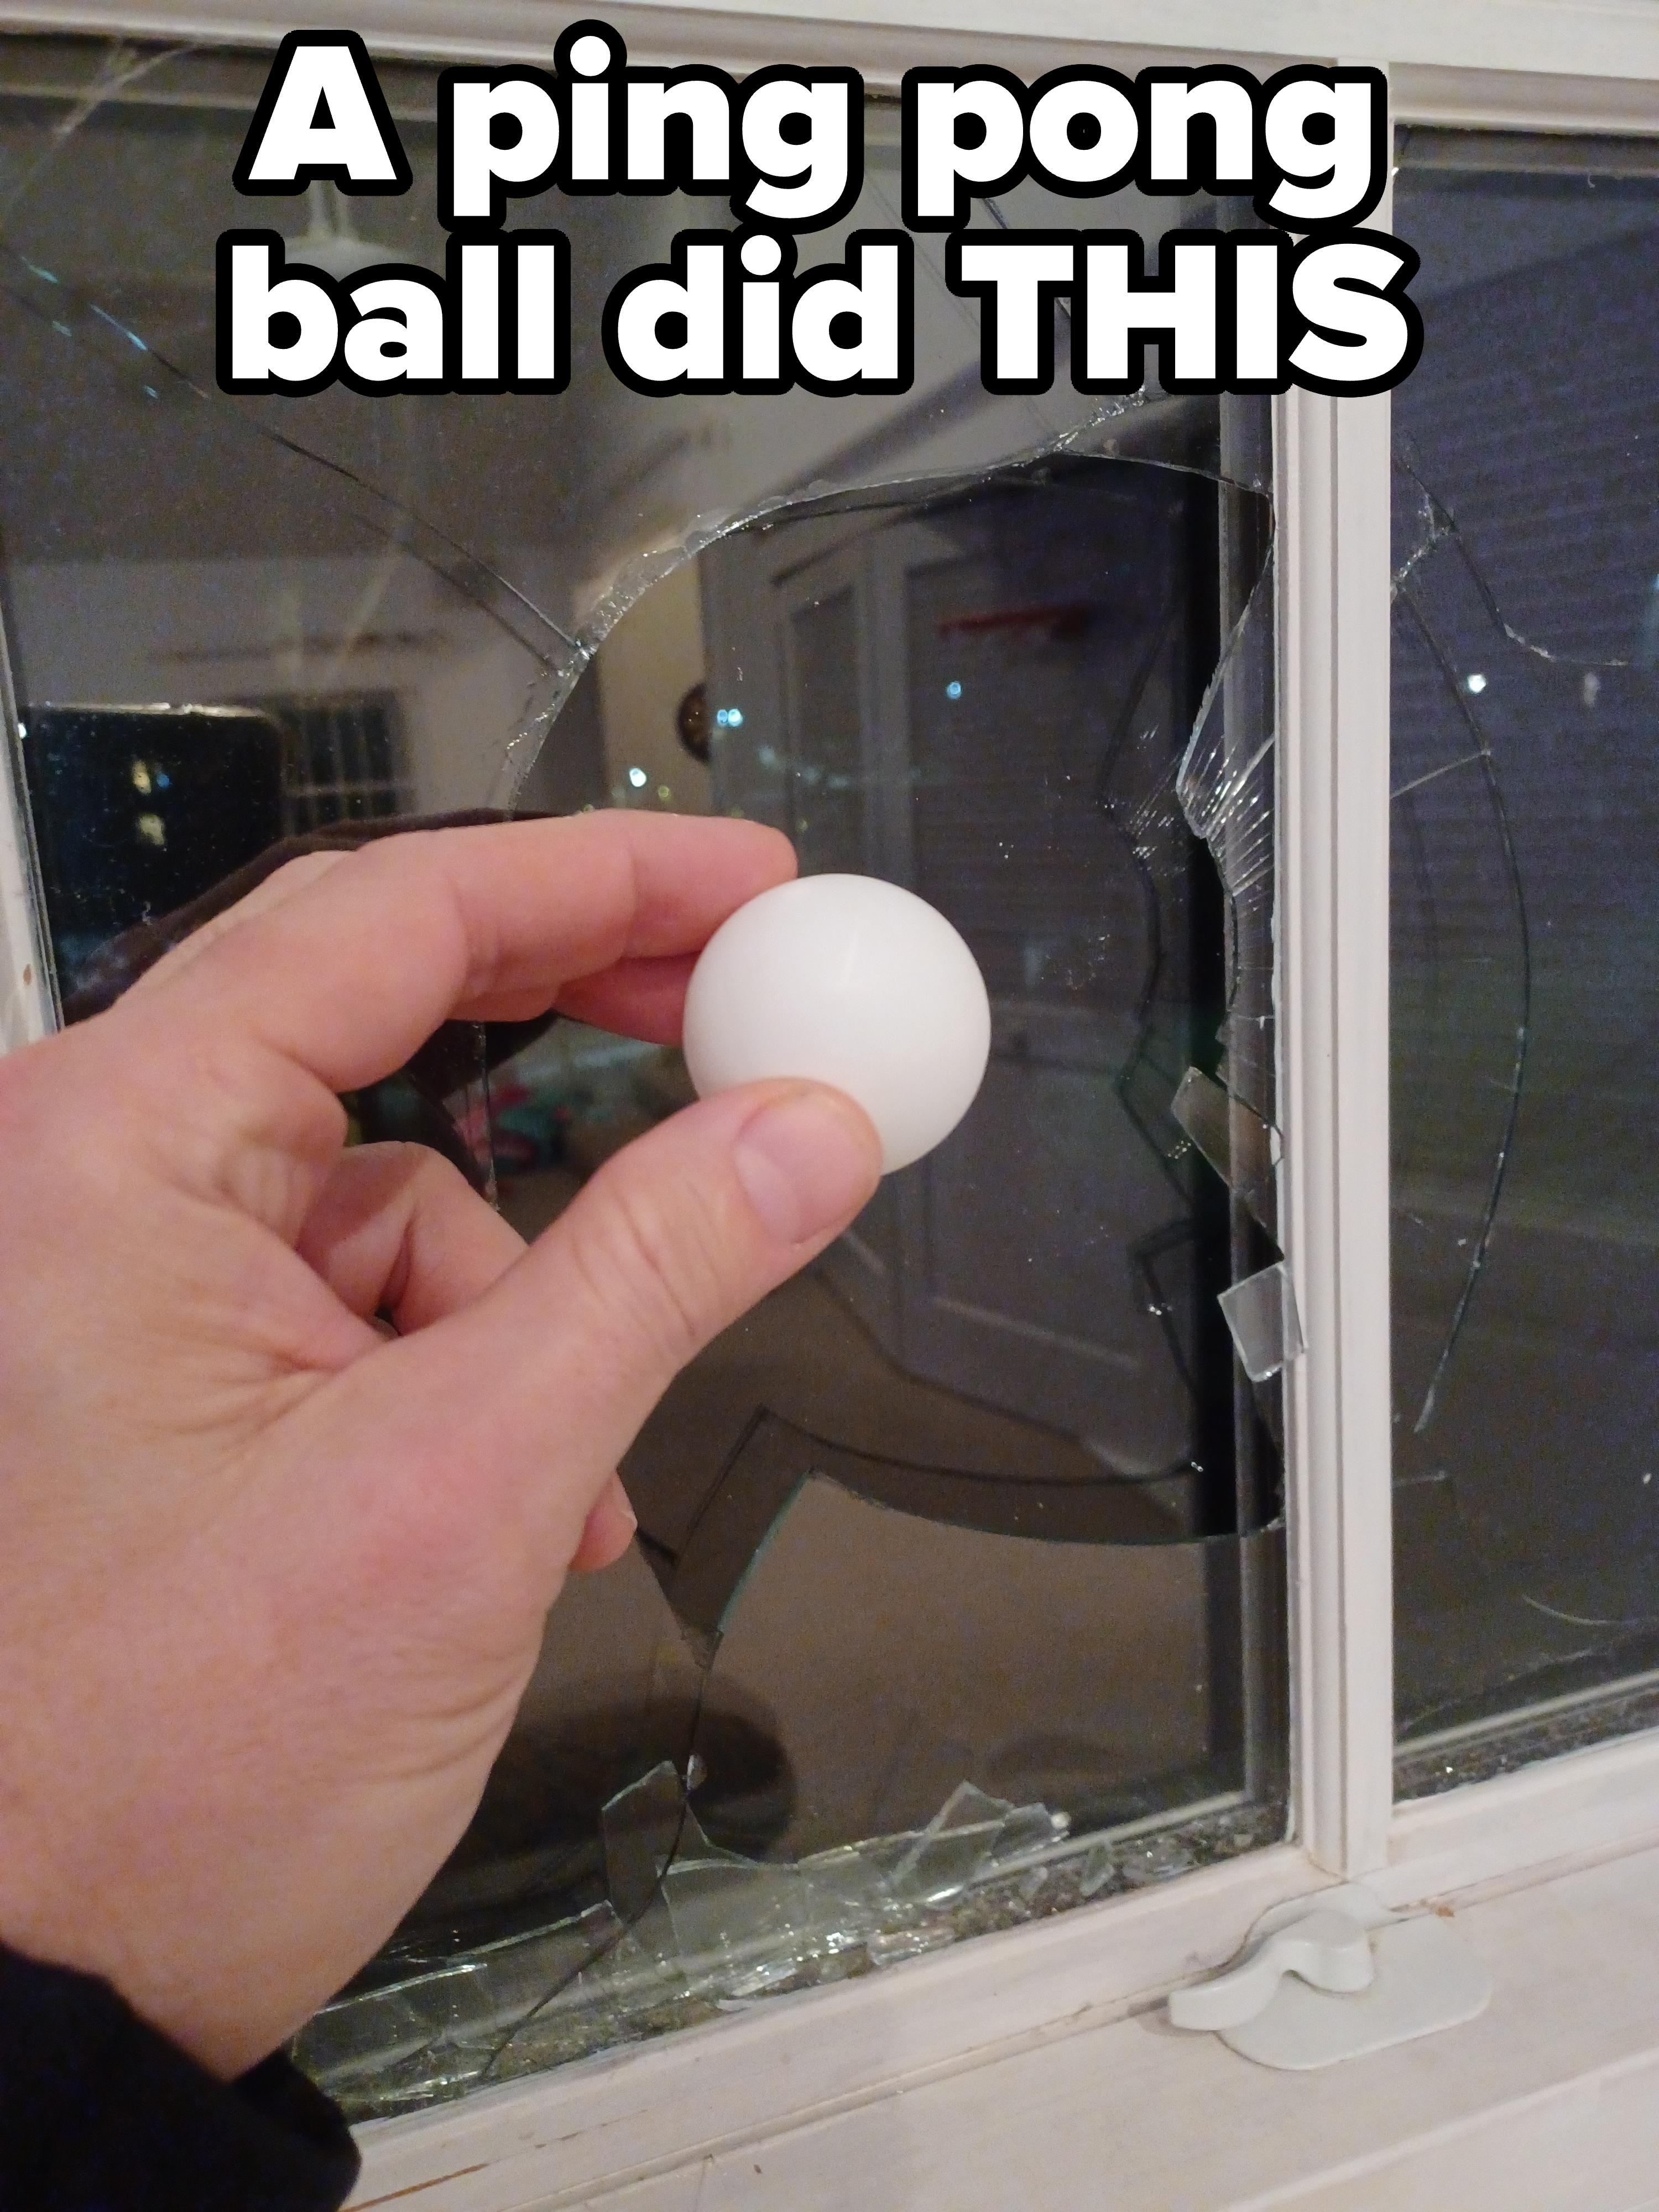 &quot;A ping pong ball did THIS&quot;